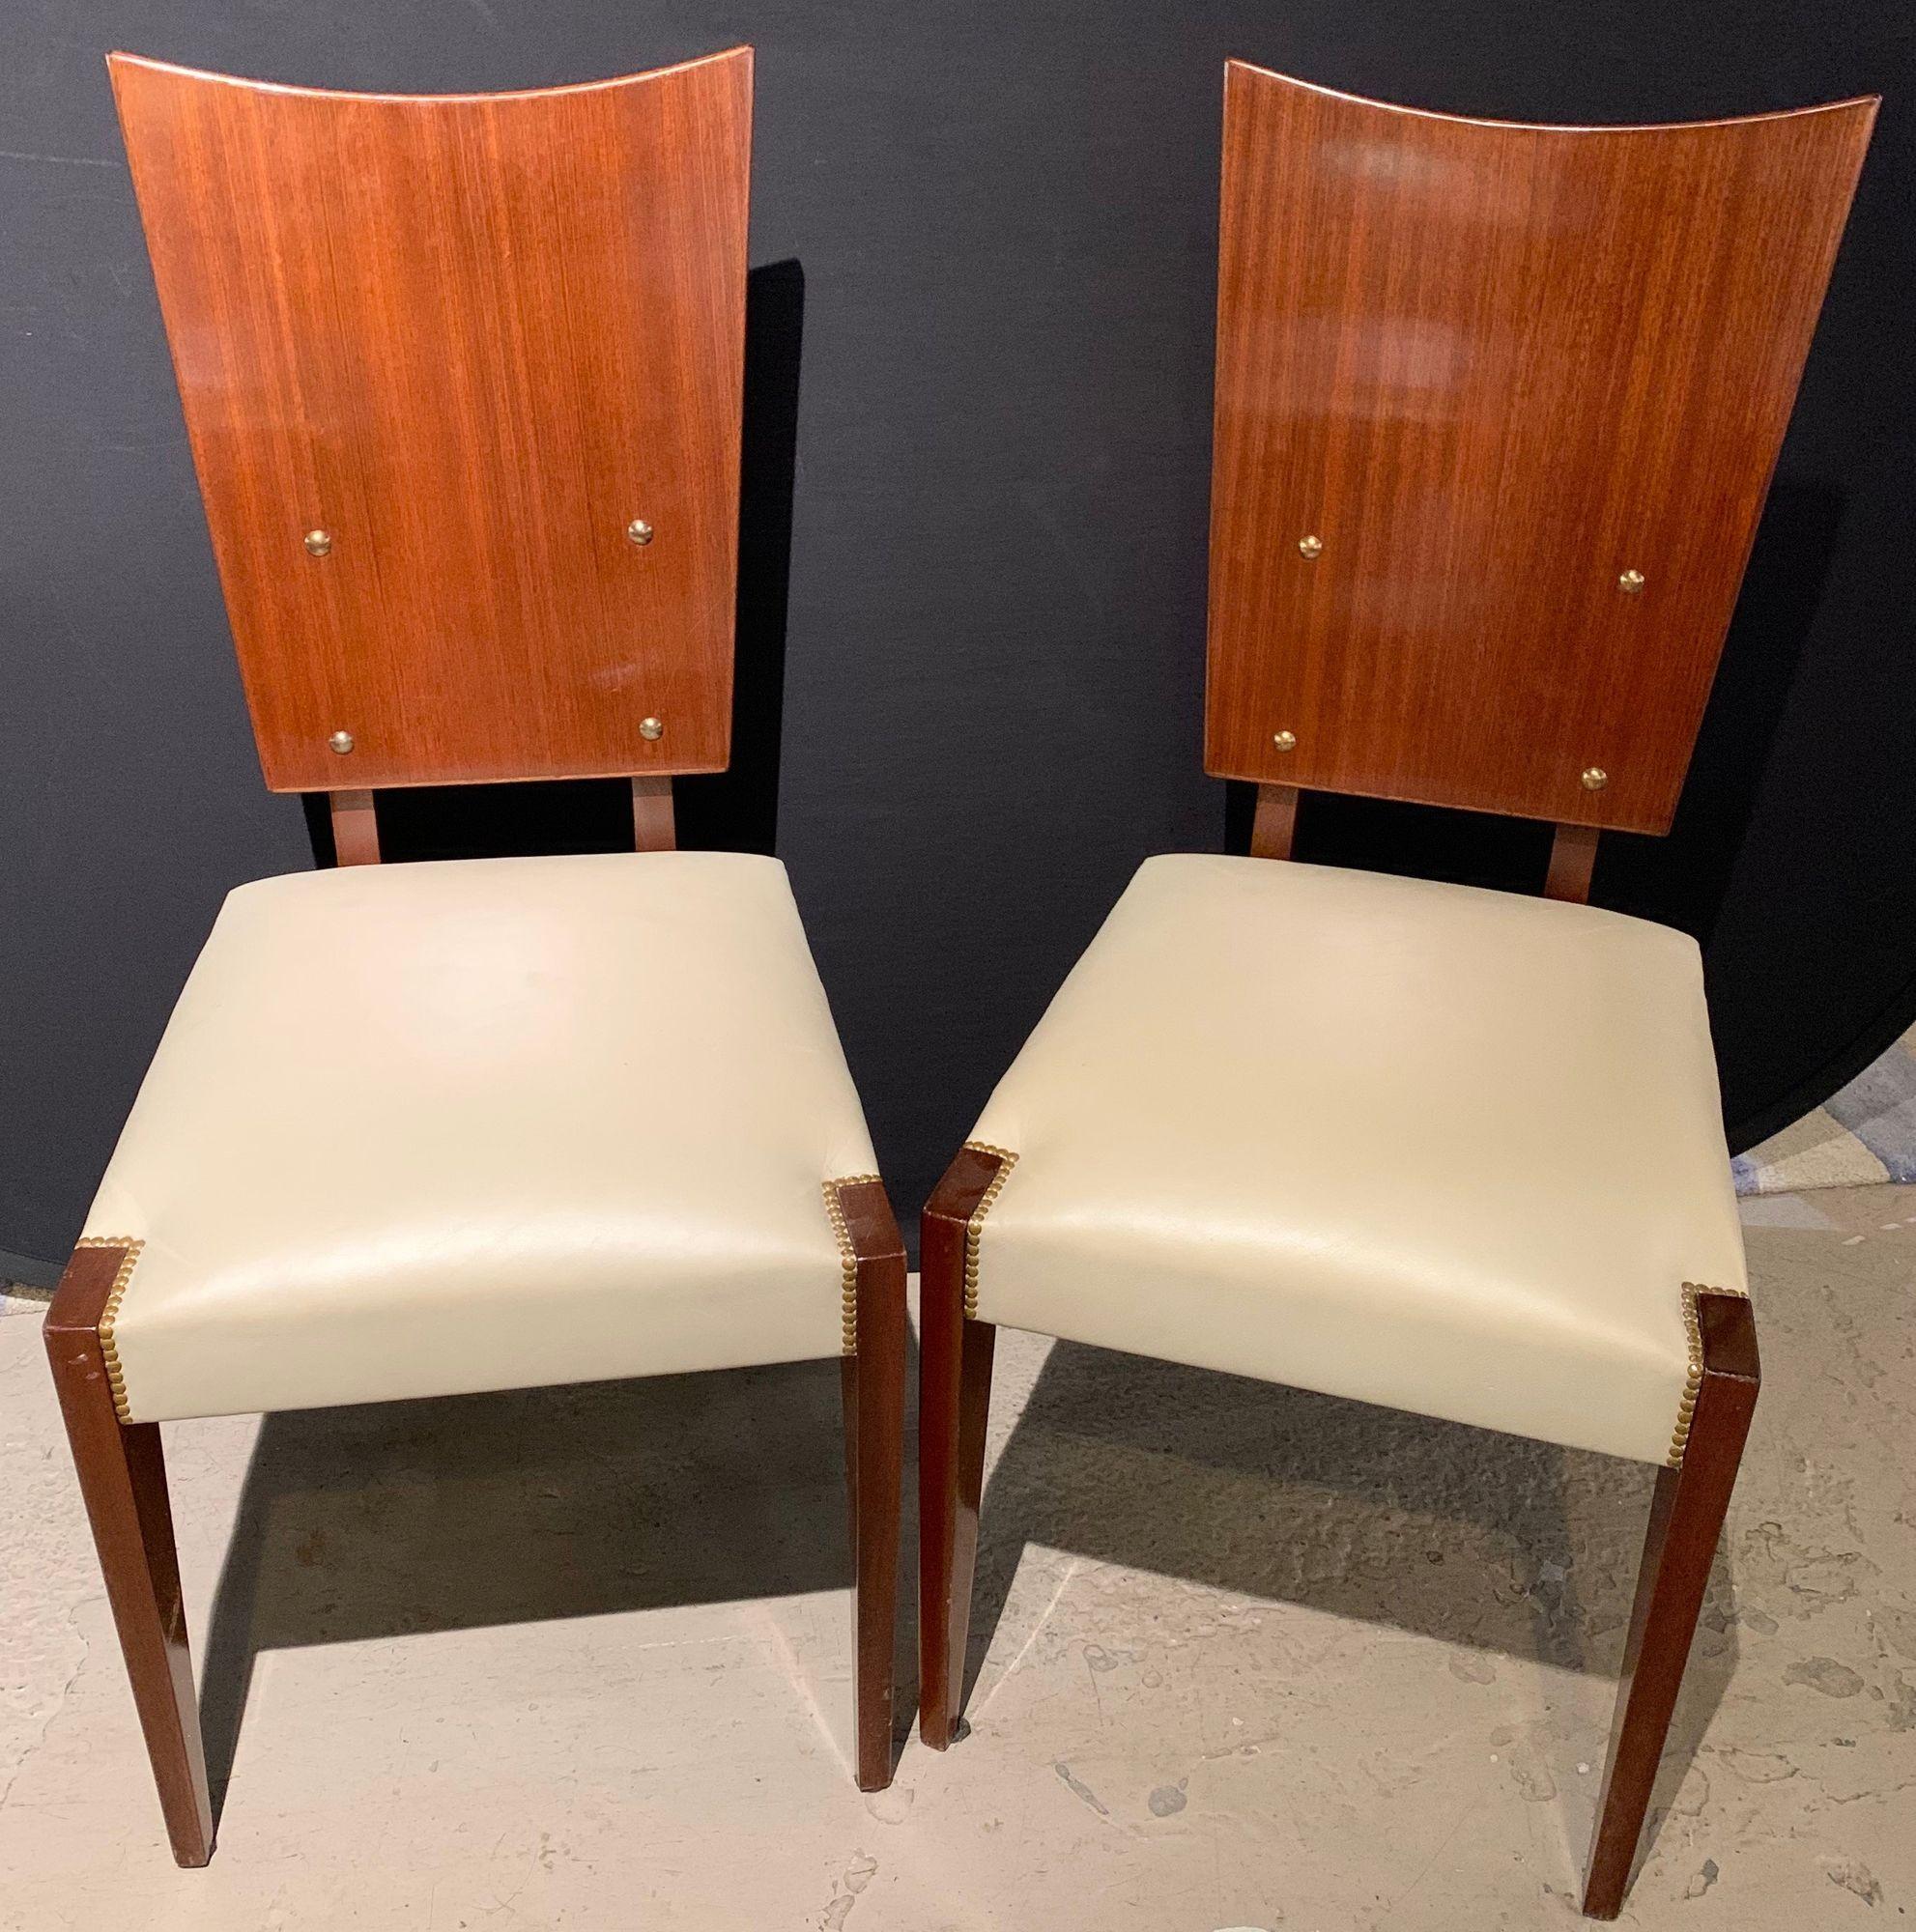 Set of Five French Andre Sornay Style Mid-Century Modern Dining / Side Chairs
 
Set of five Mid-Century Modern or Art Deco style shield back dining, office or side chairs. Each having a Macassar style high shine finish with button backs on padded